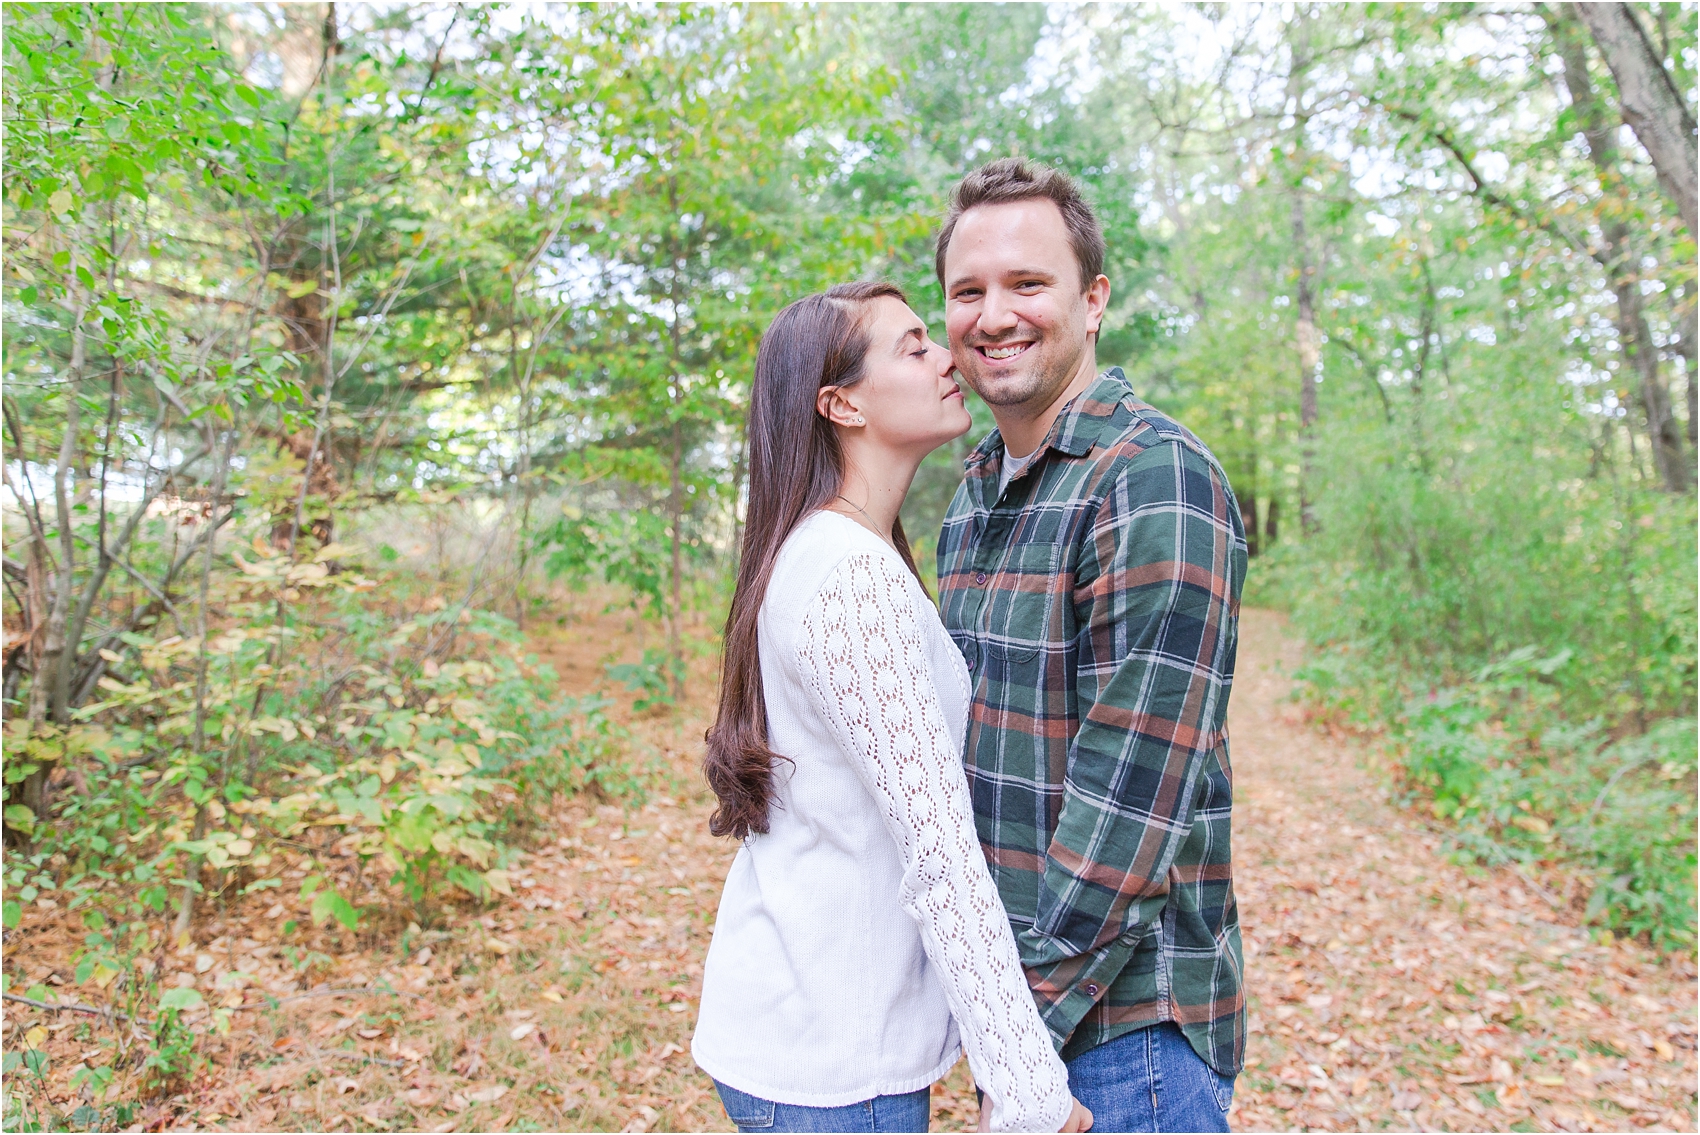 relaxed-autumn-engagement-photos-at-hudson-mills-metropark-in-dexter-mi-by-courtney-carolyn-photography_0025.jpg